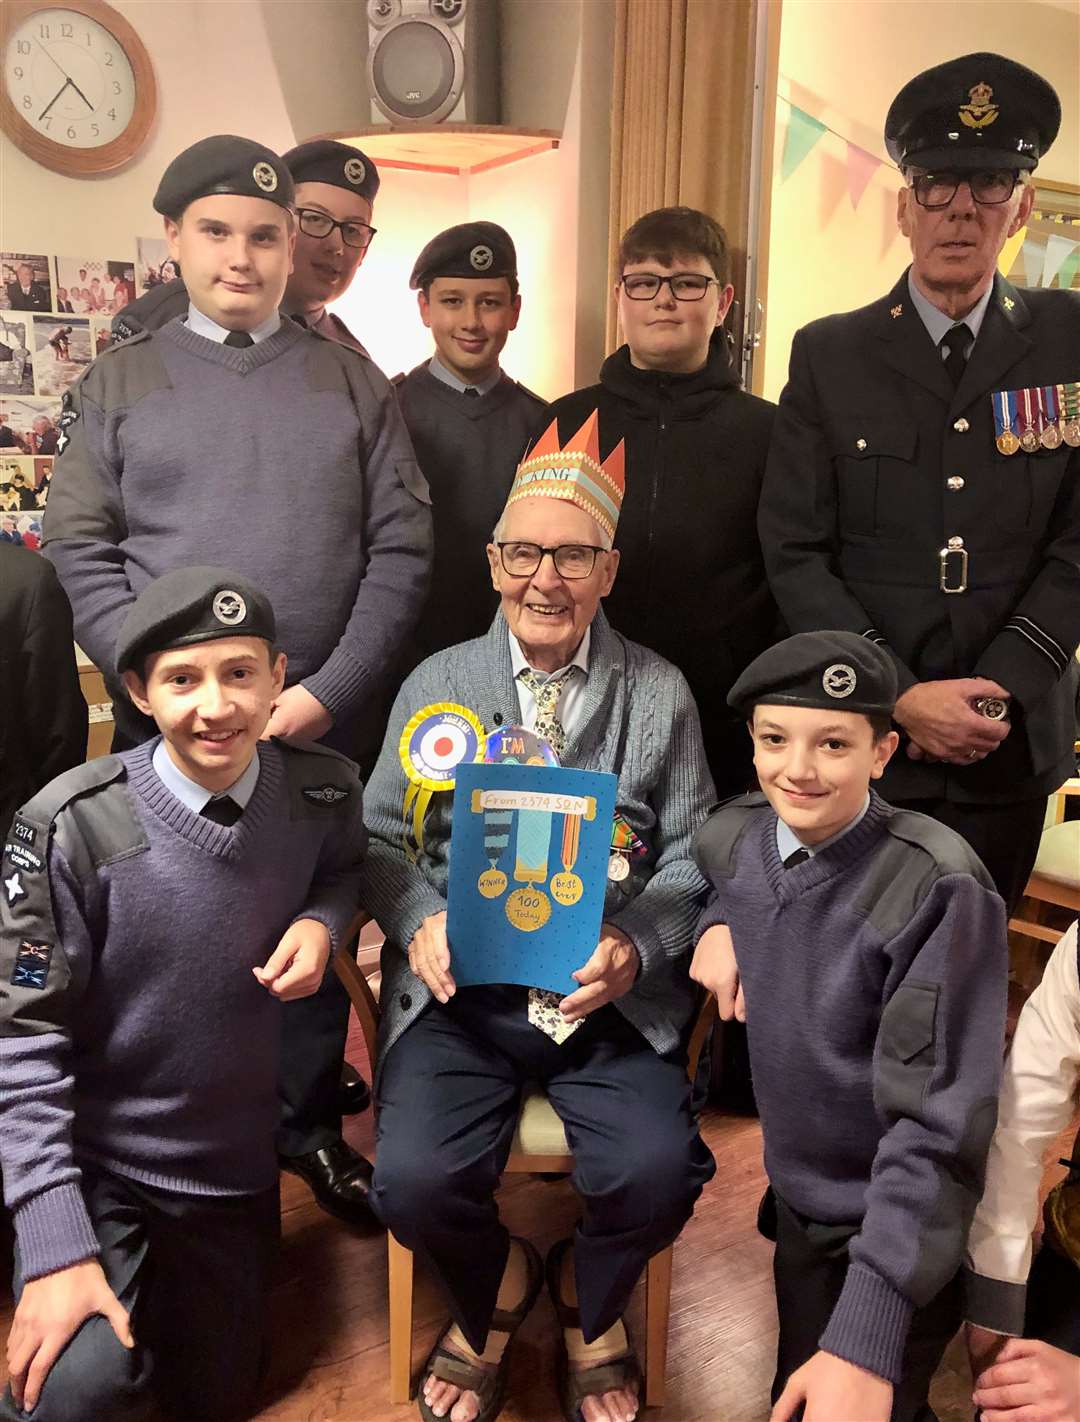 John Waye with members of the 2374 (Ditton) Squadron Air Training Corps on the occasion of his 100th birthday